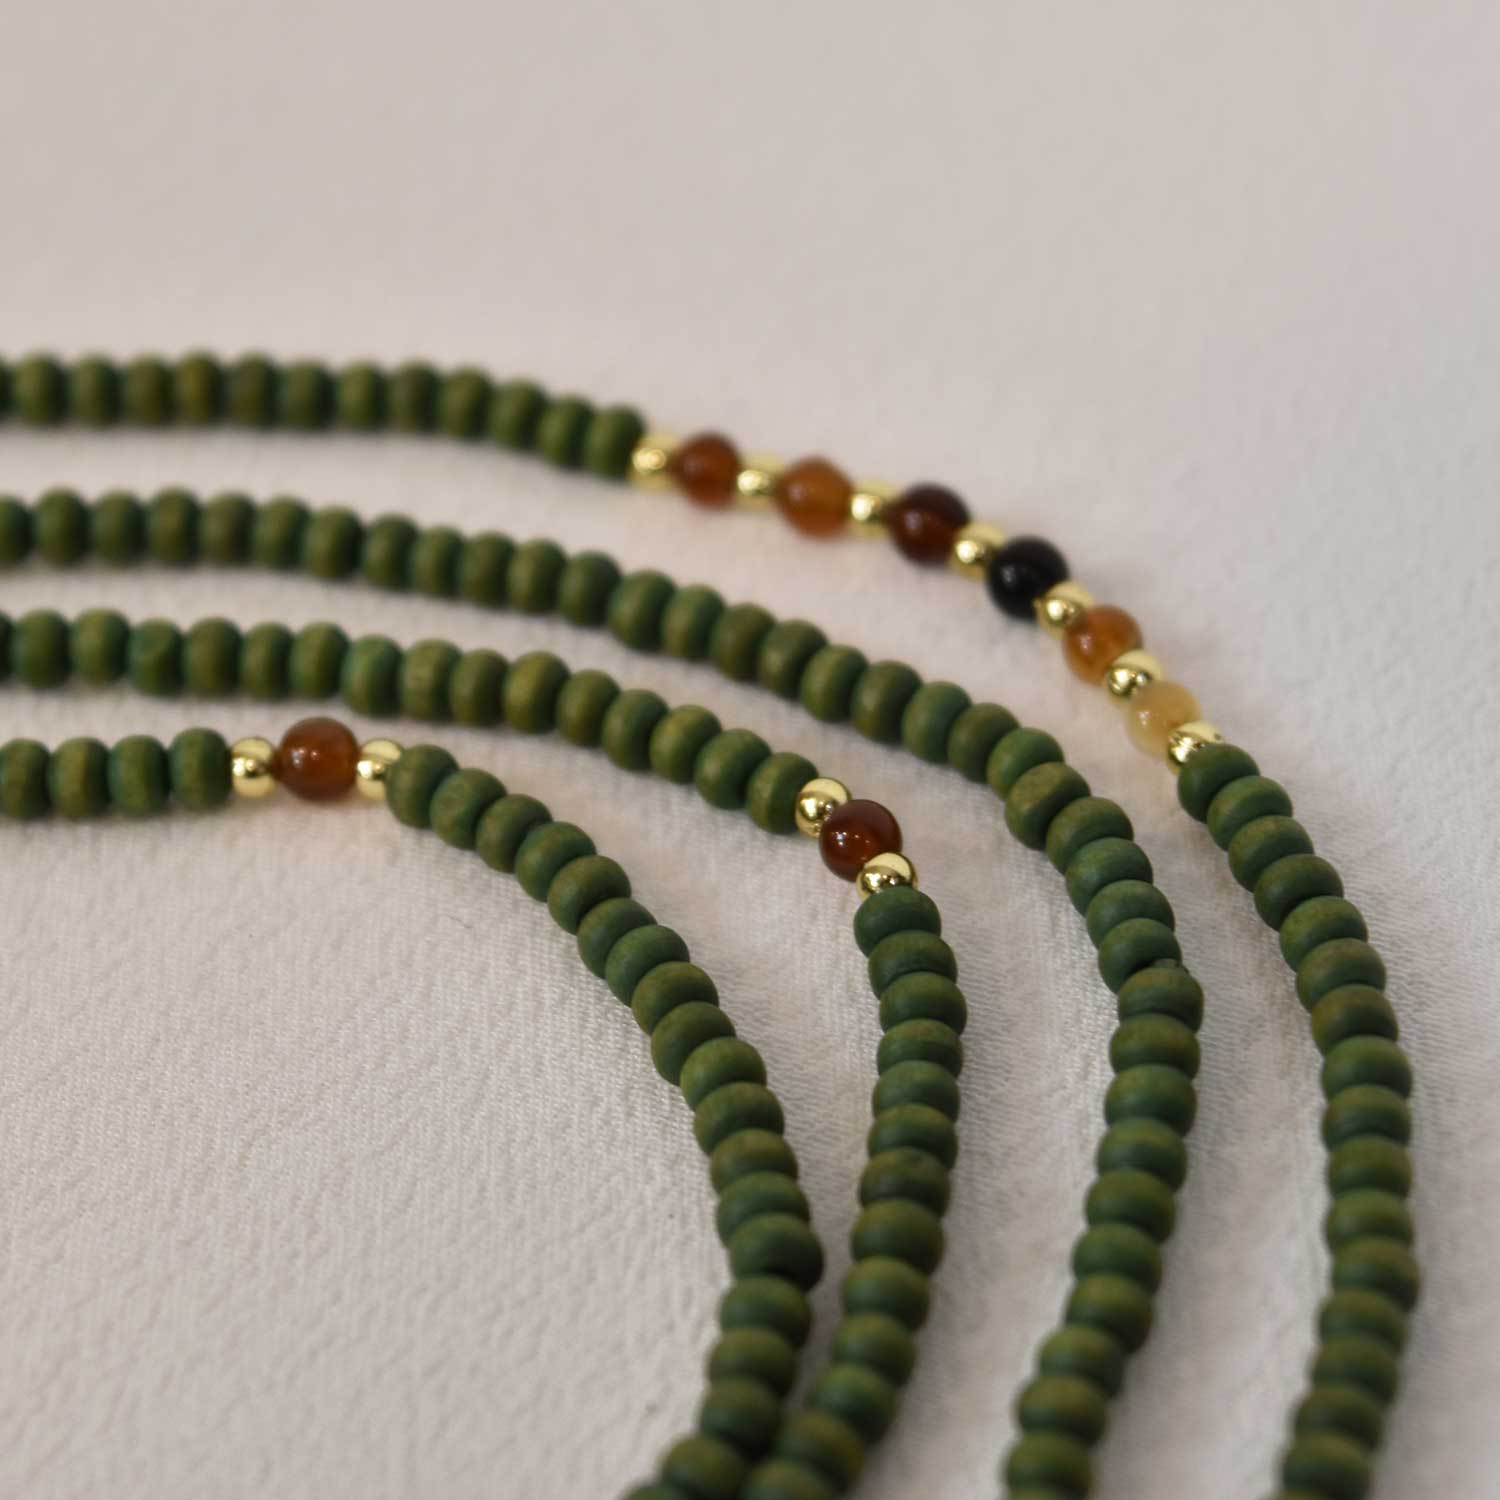 Green long beads necklace